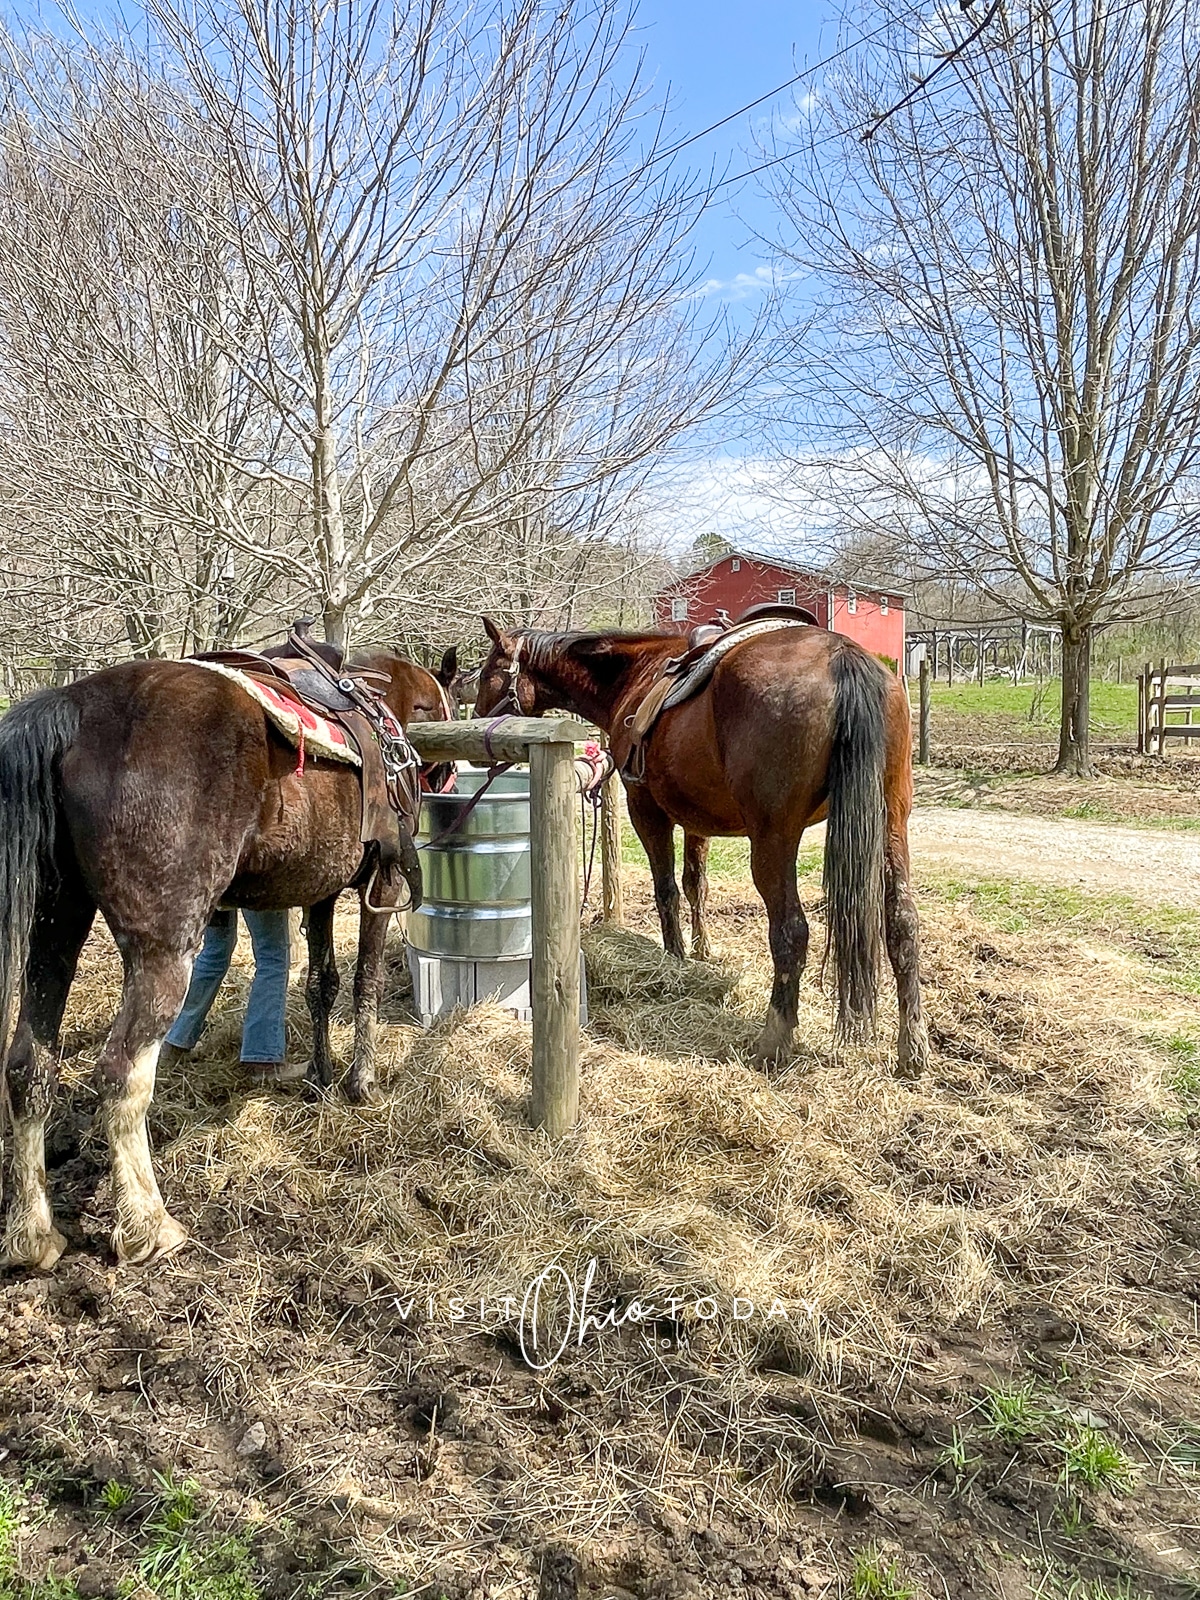 two brown horses eating hay. Photo credit: Cindy Gordon of VisitOhioToday.com